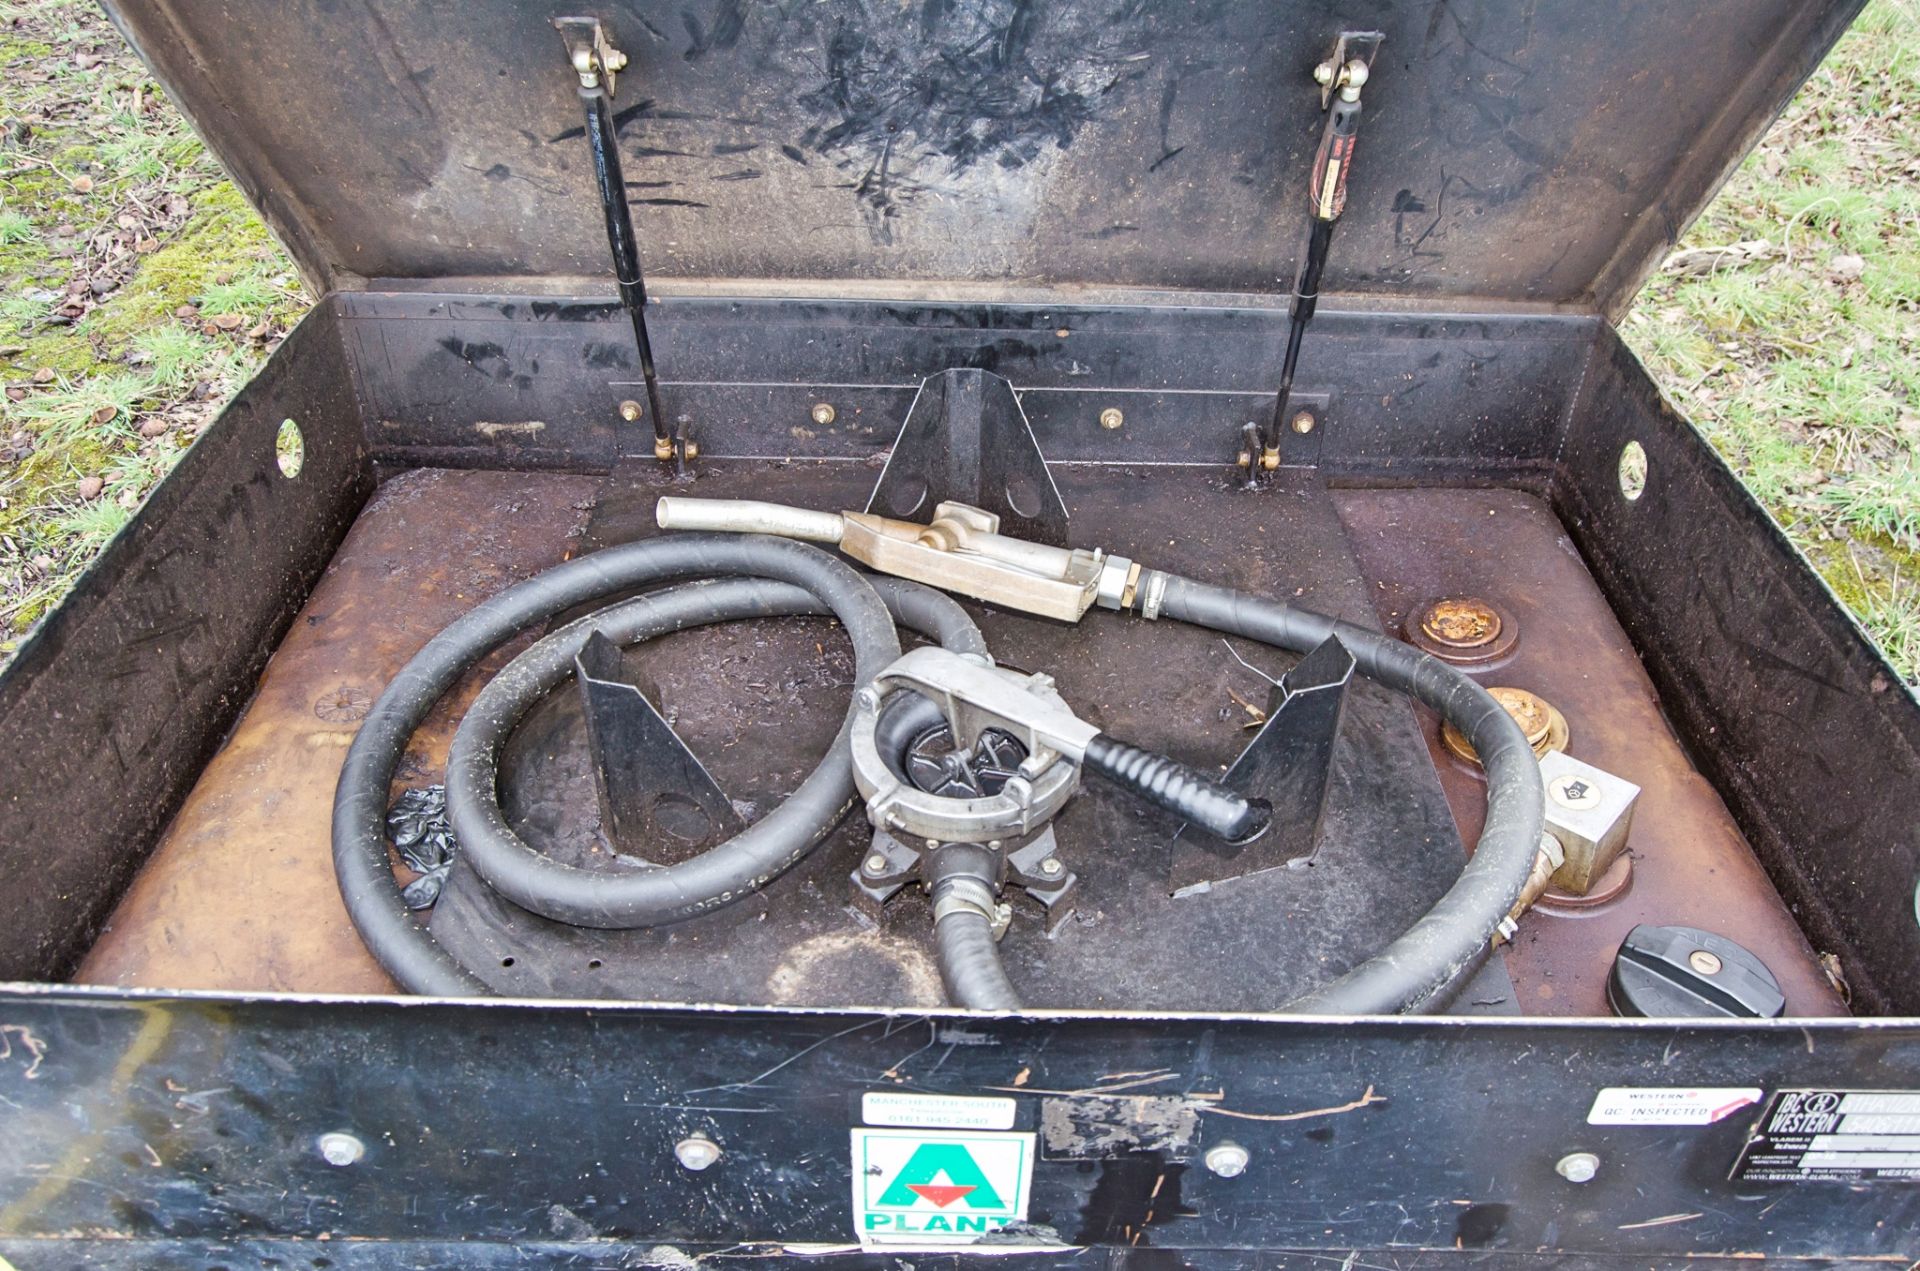 Western Easy Cube 390 litre bunded fuel bowser c/w manual pump, delivery hose and nozzle A697802 - Image 3 of 3